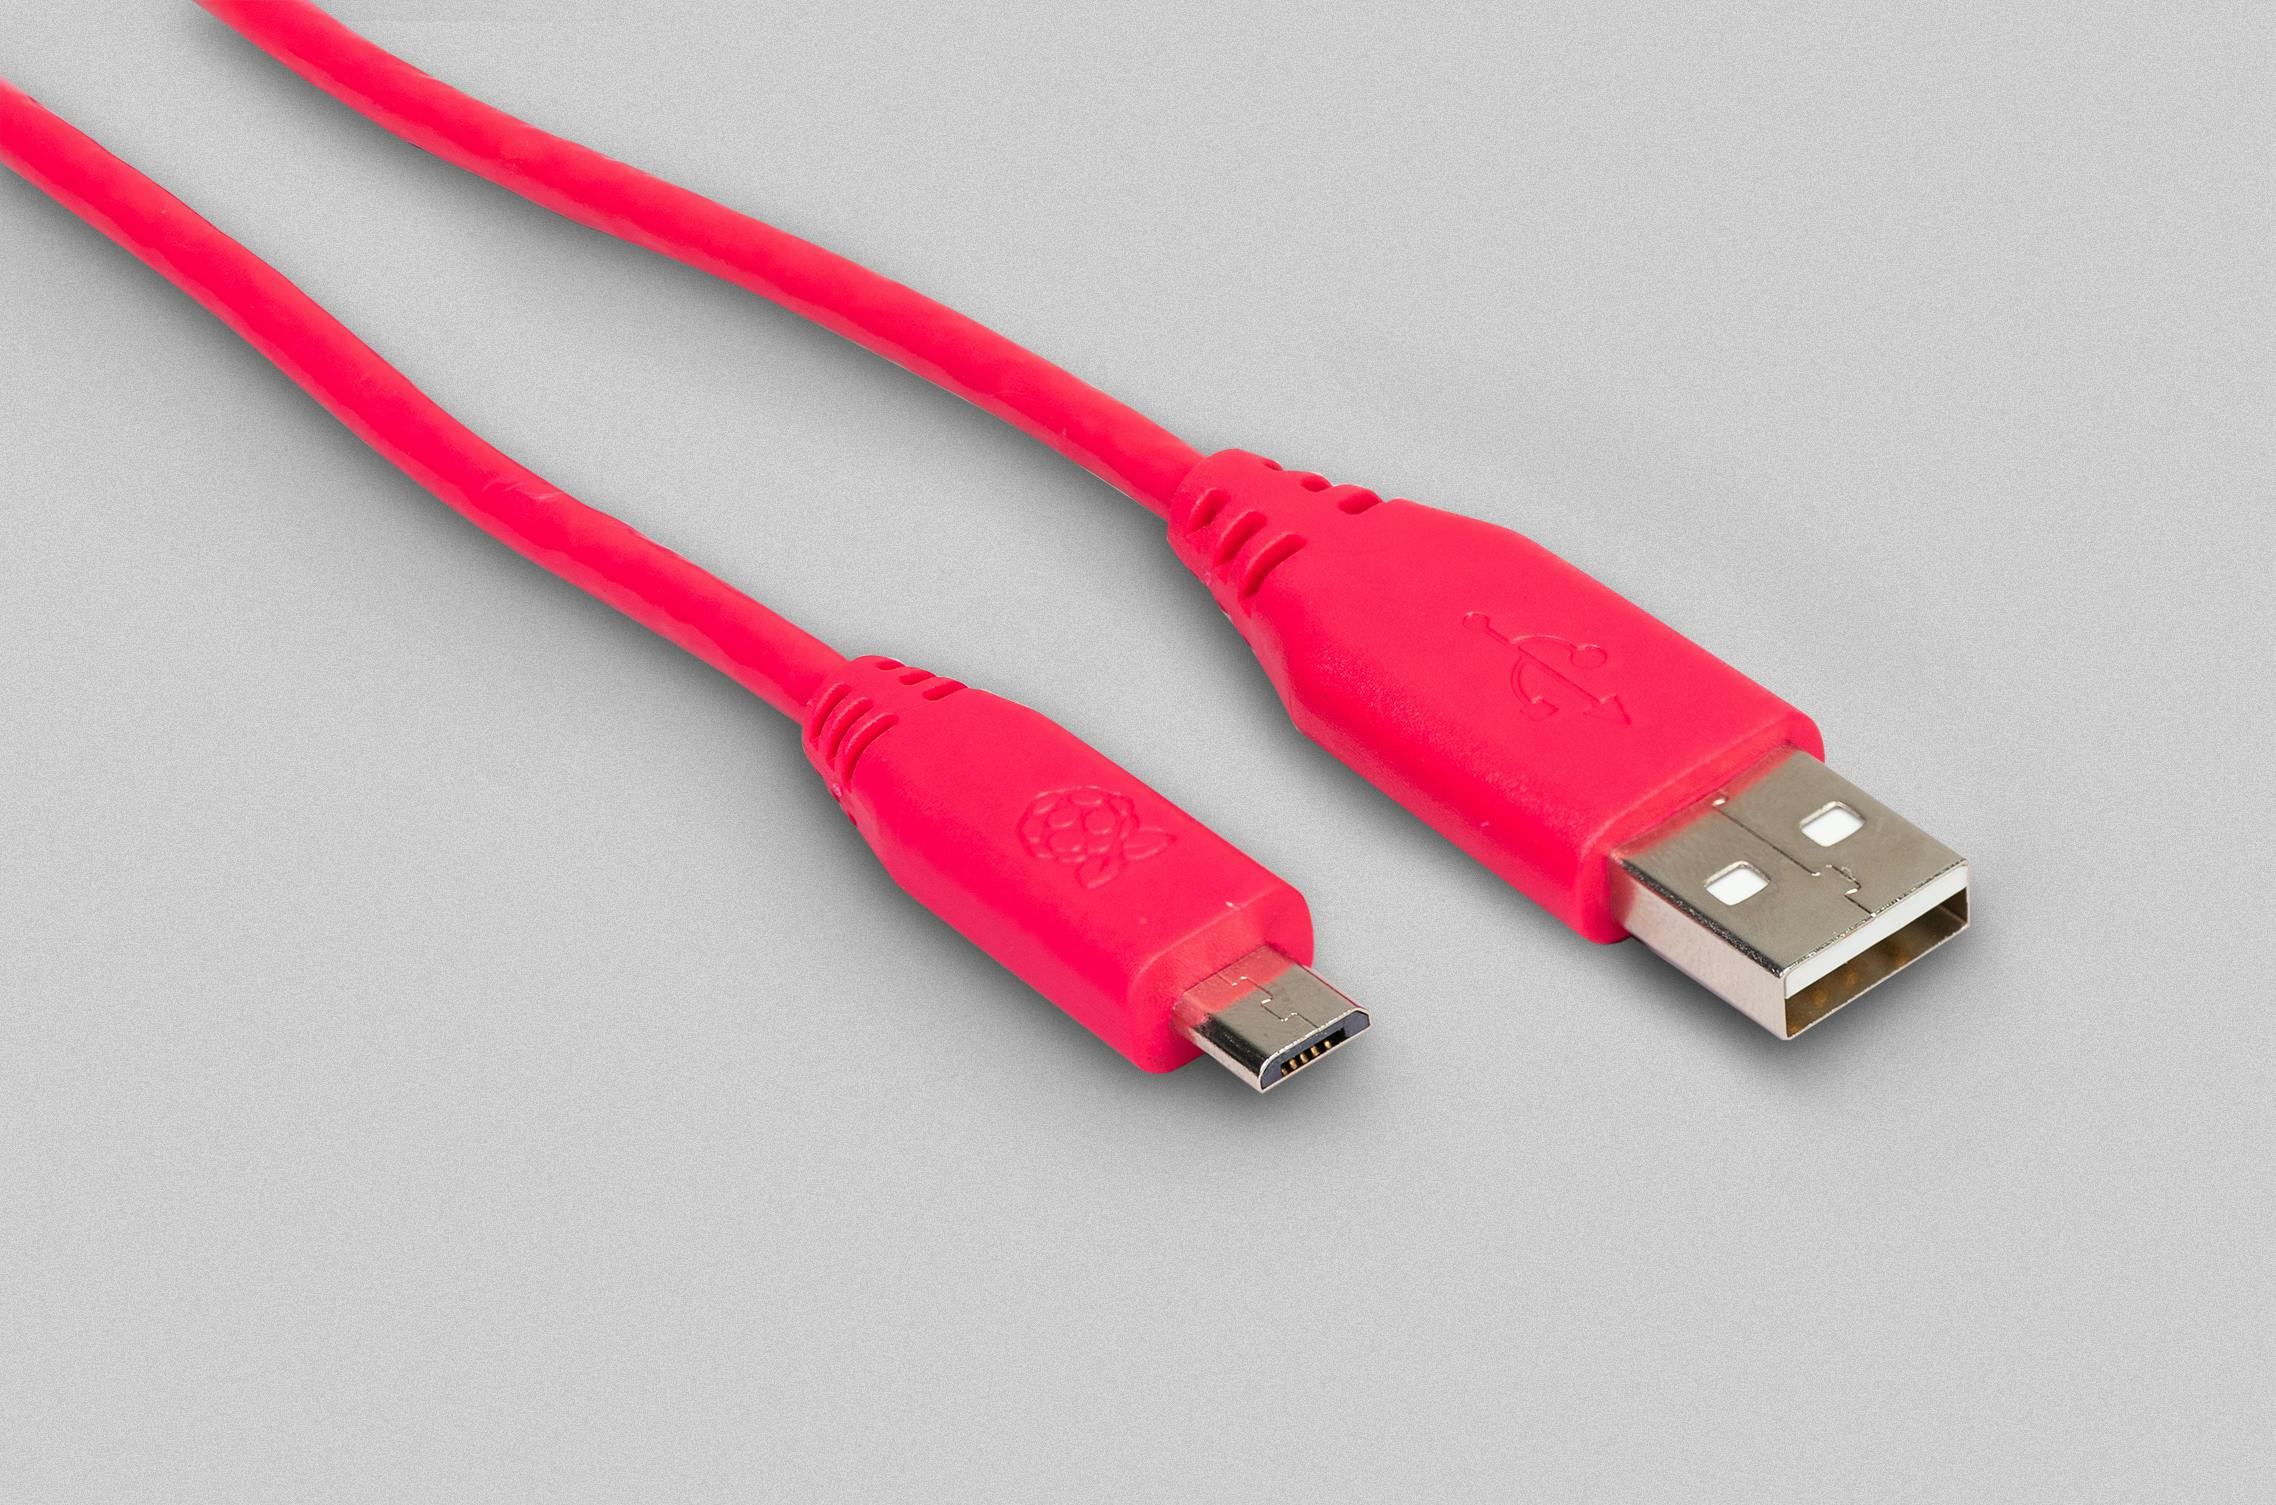 Buy a USB A/Male to Micro USB/Male cable – Raspberry Pi